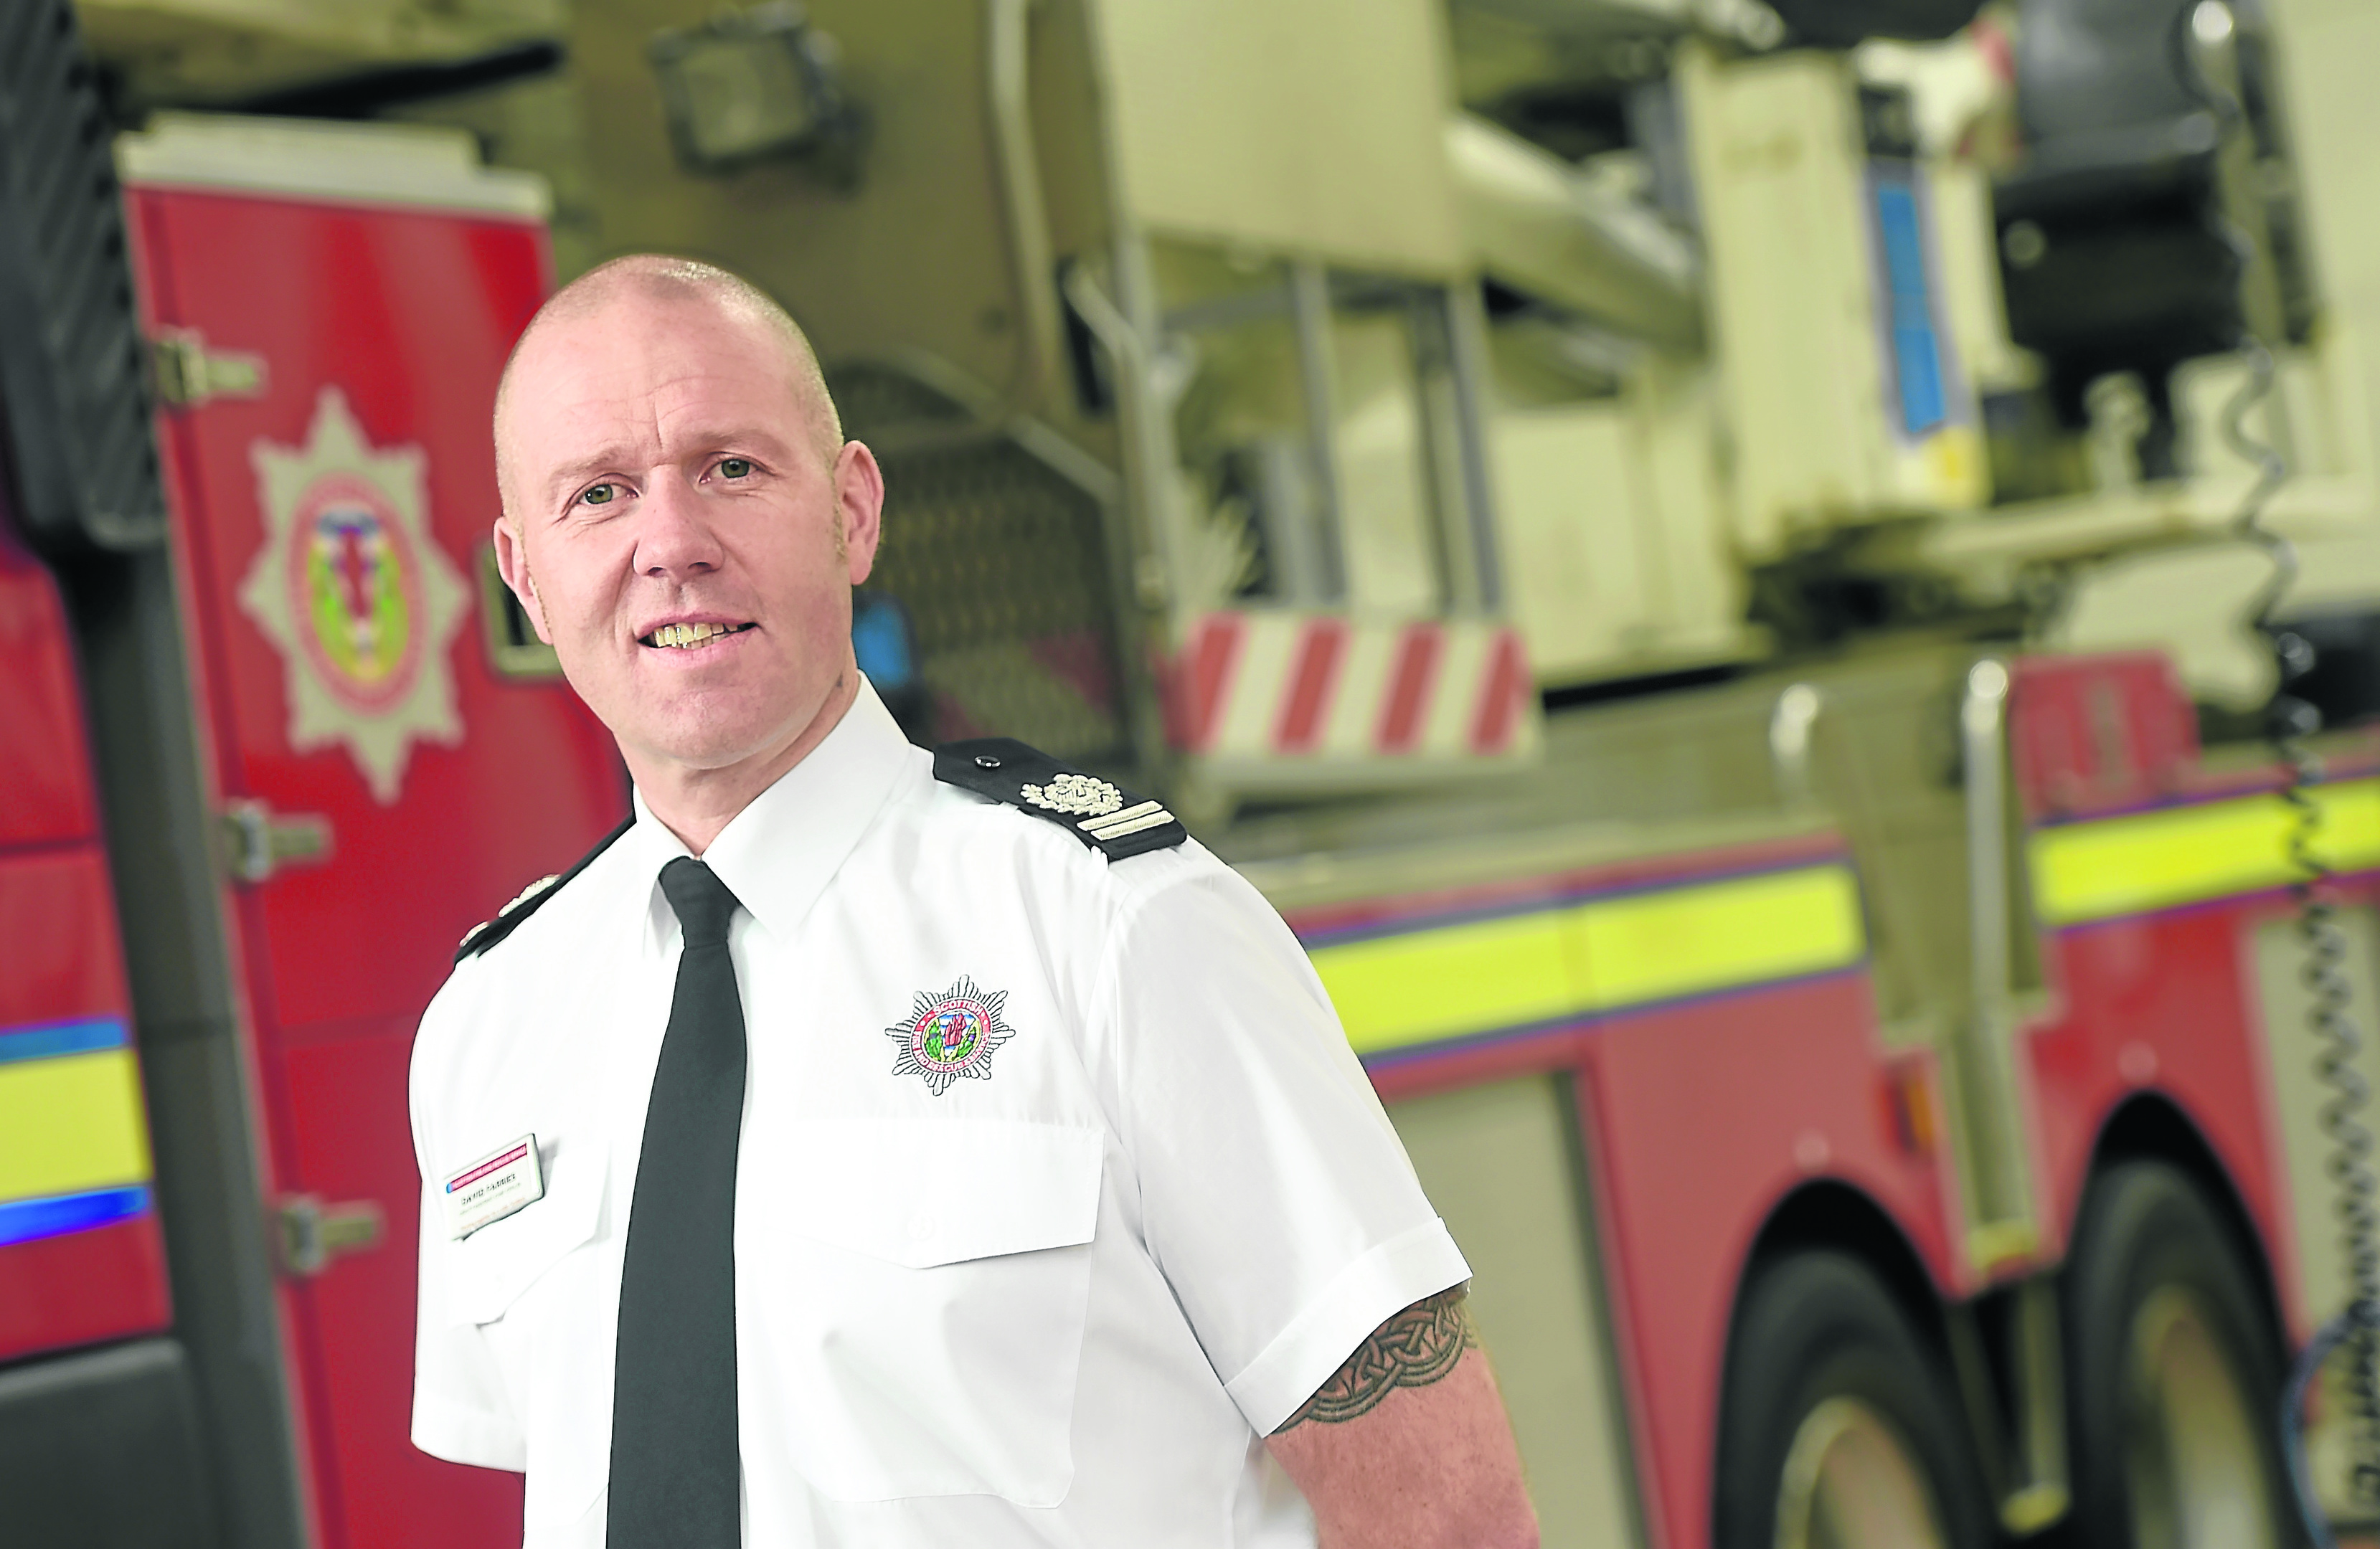 Deputy Assistant Chief Officer (DACO) David Farries, head of service delivery for North of Scotland photographed in Inverness Fire Station. Picture by Sandy McCook